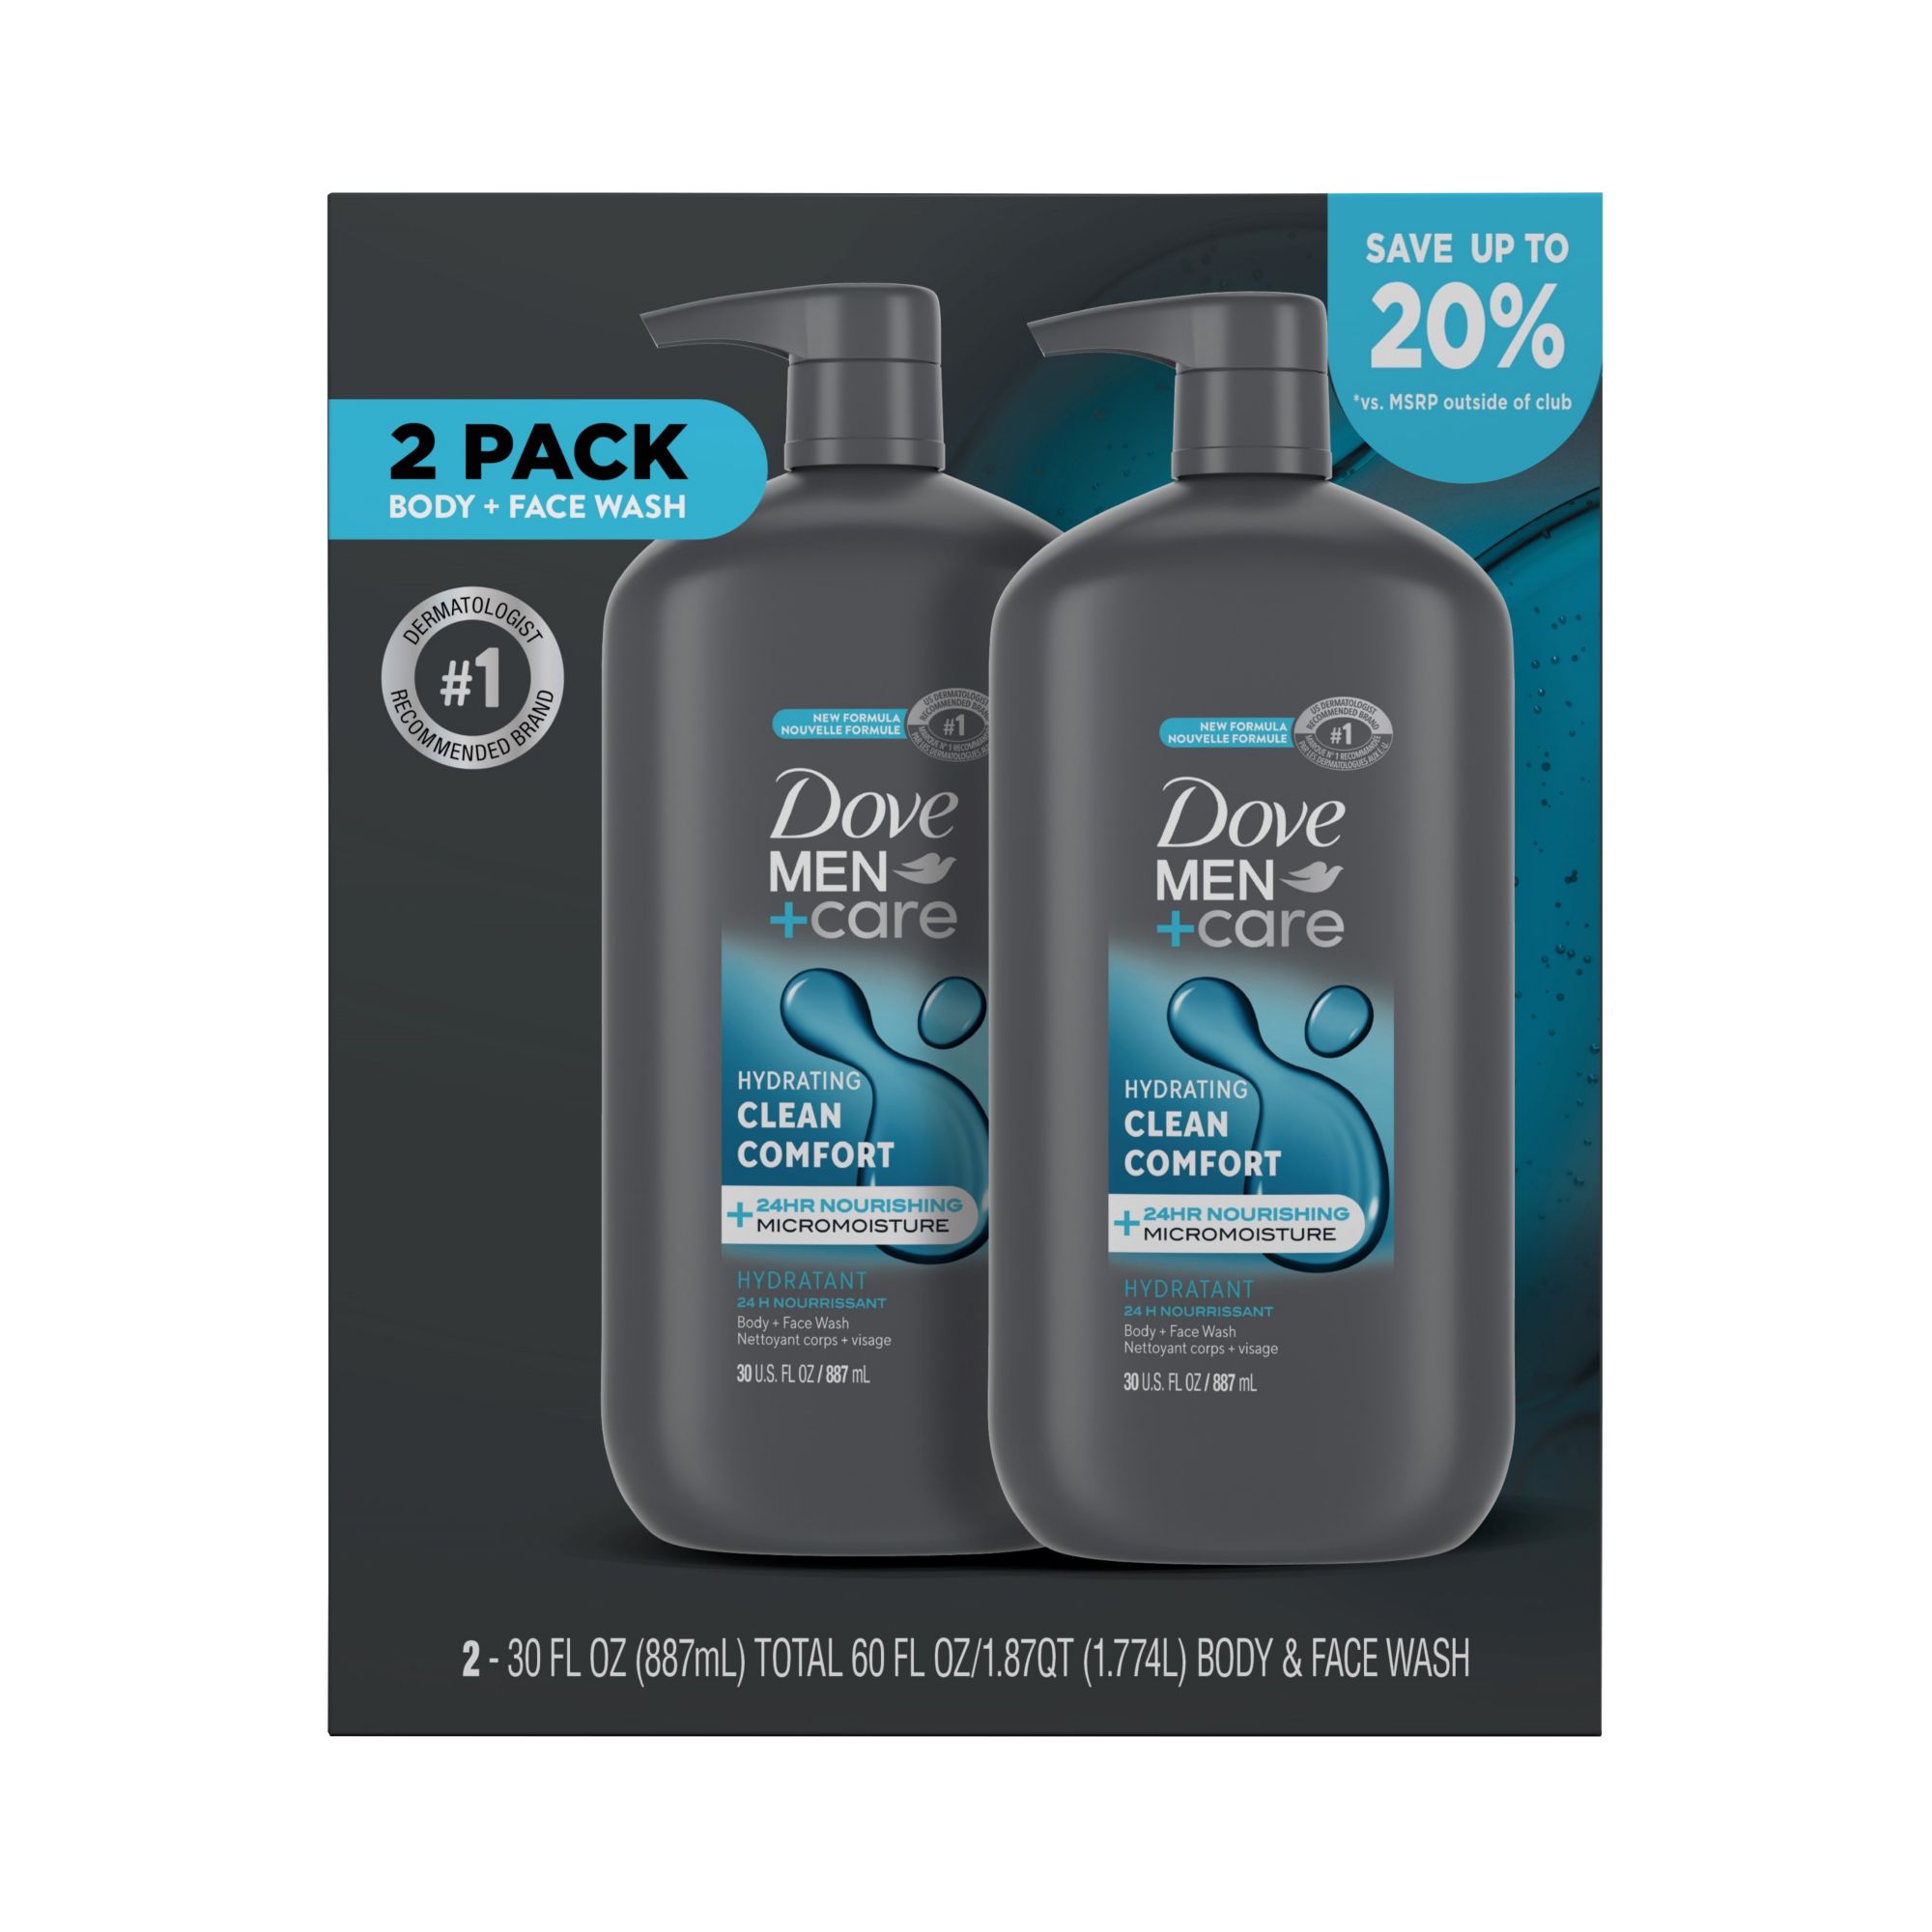 Men+Care Clean Comfort Body and Face Wash